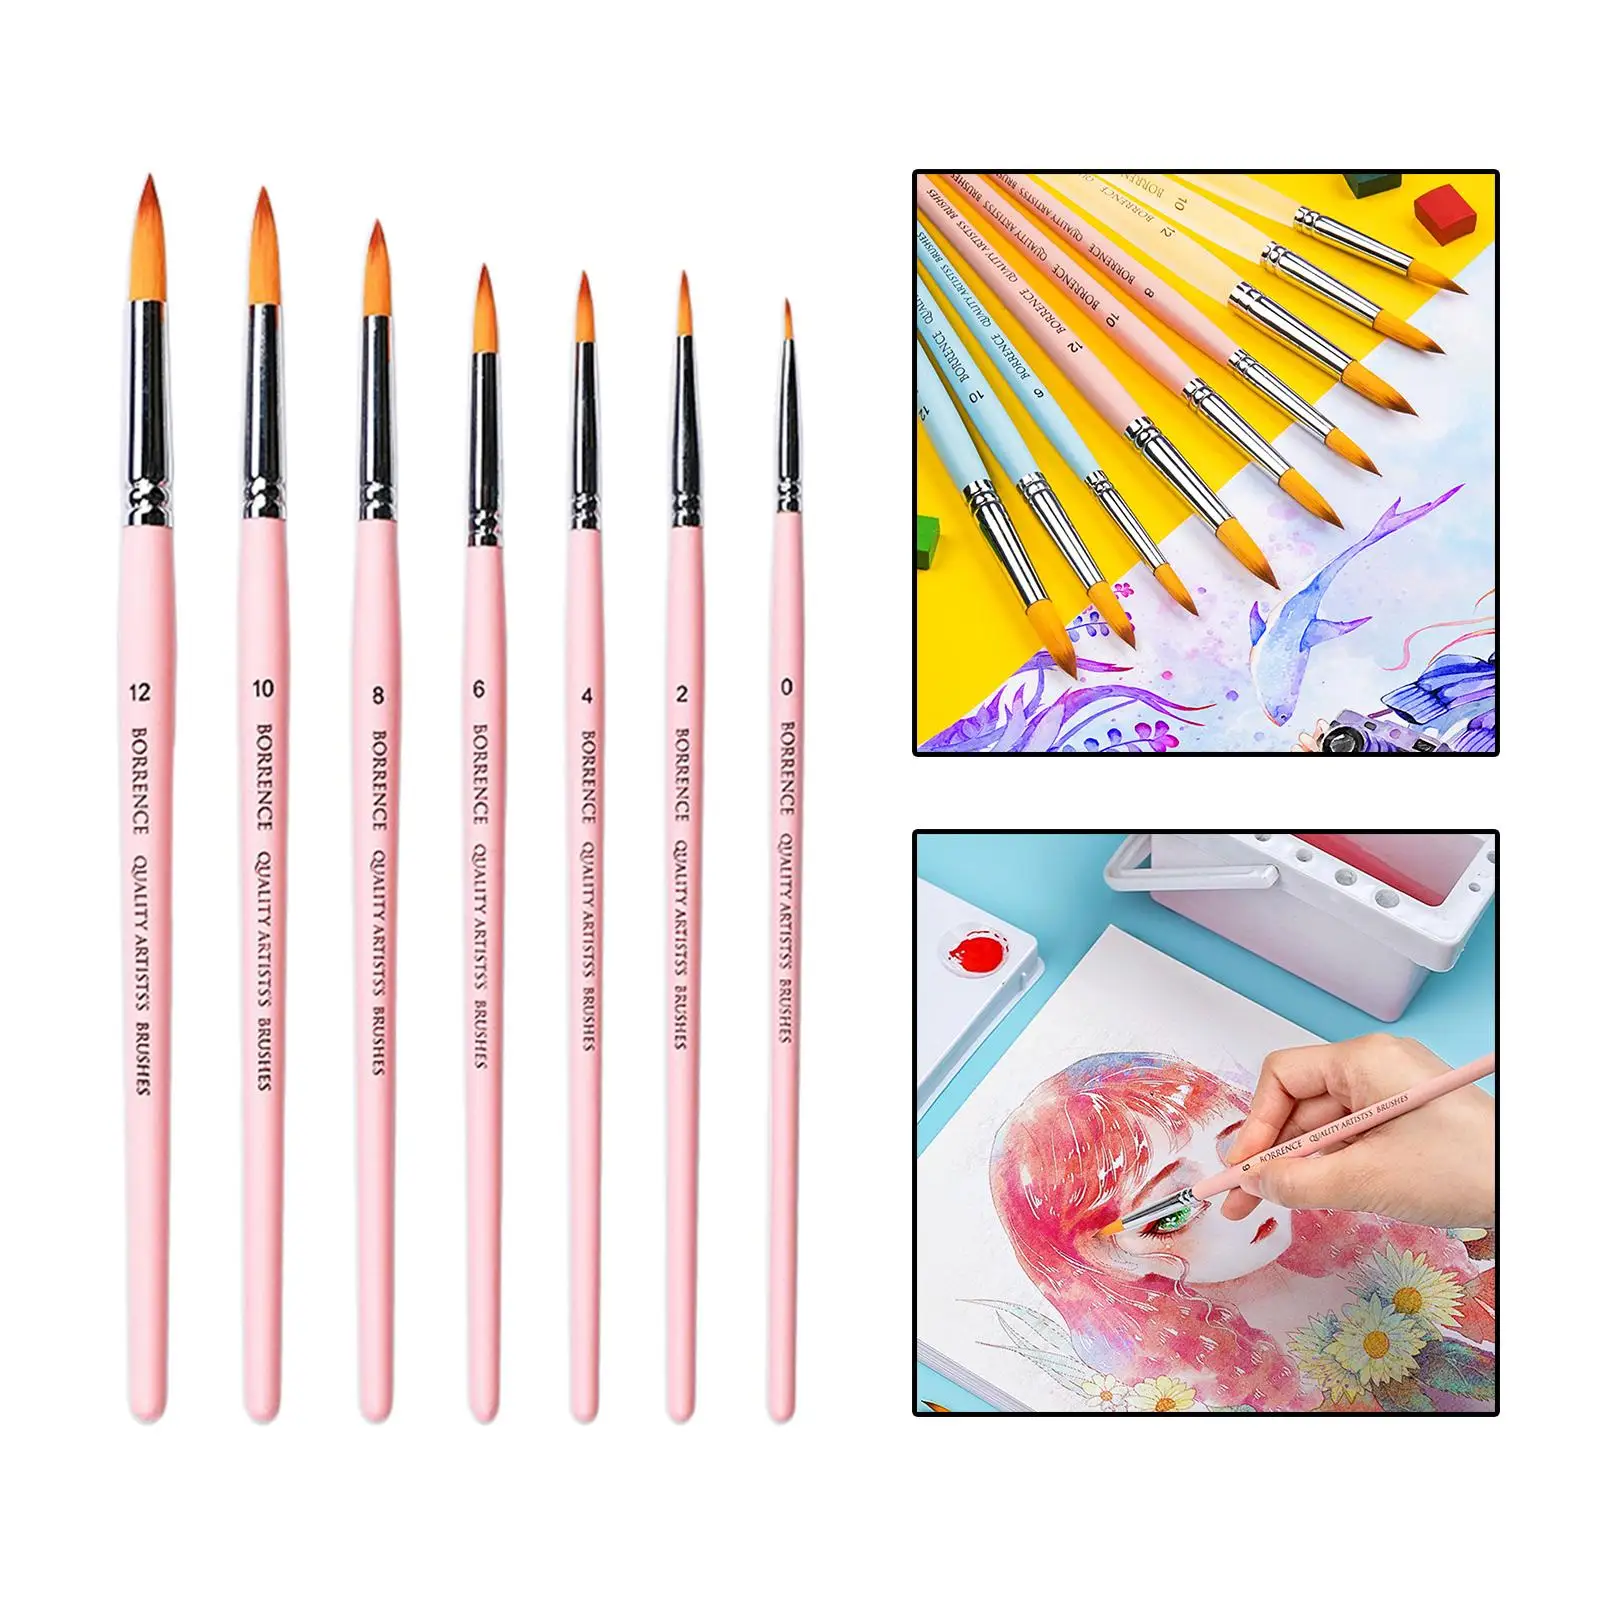 7x Artist Paint Brushes Round Pointed Tip Painting Brushes for Kids Adults